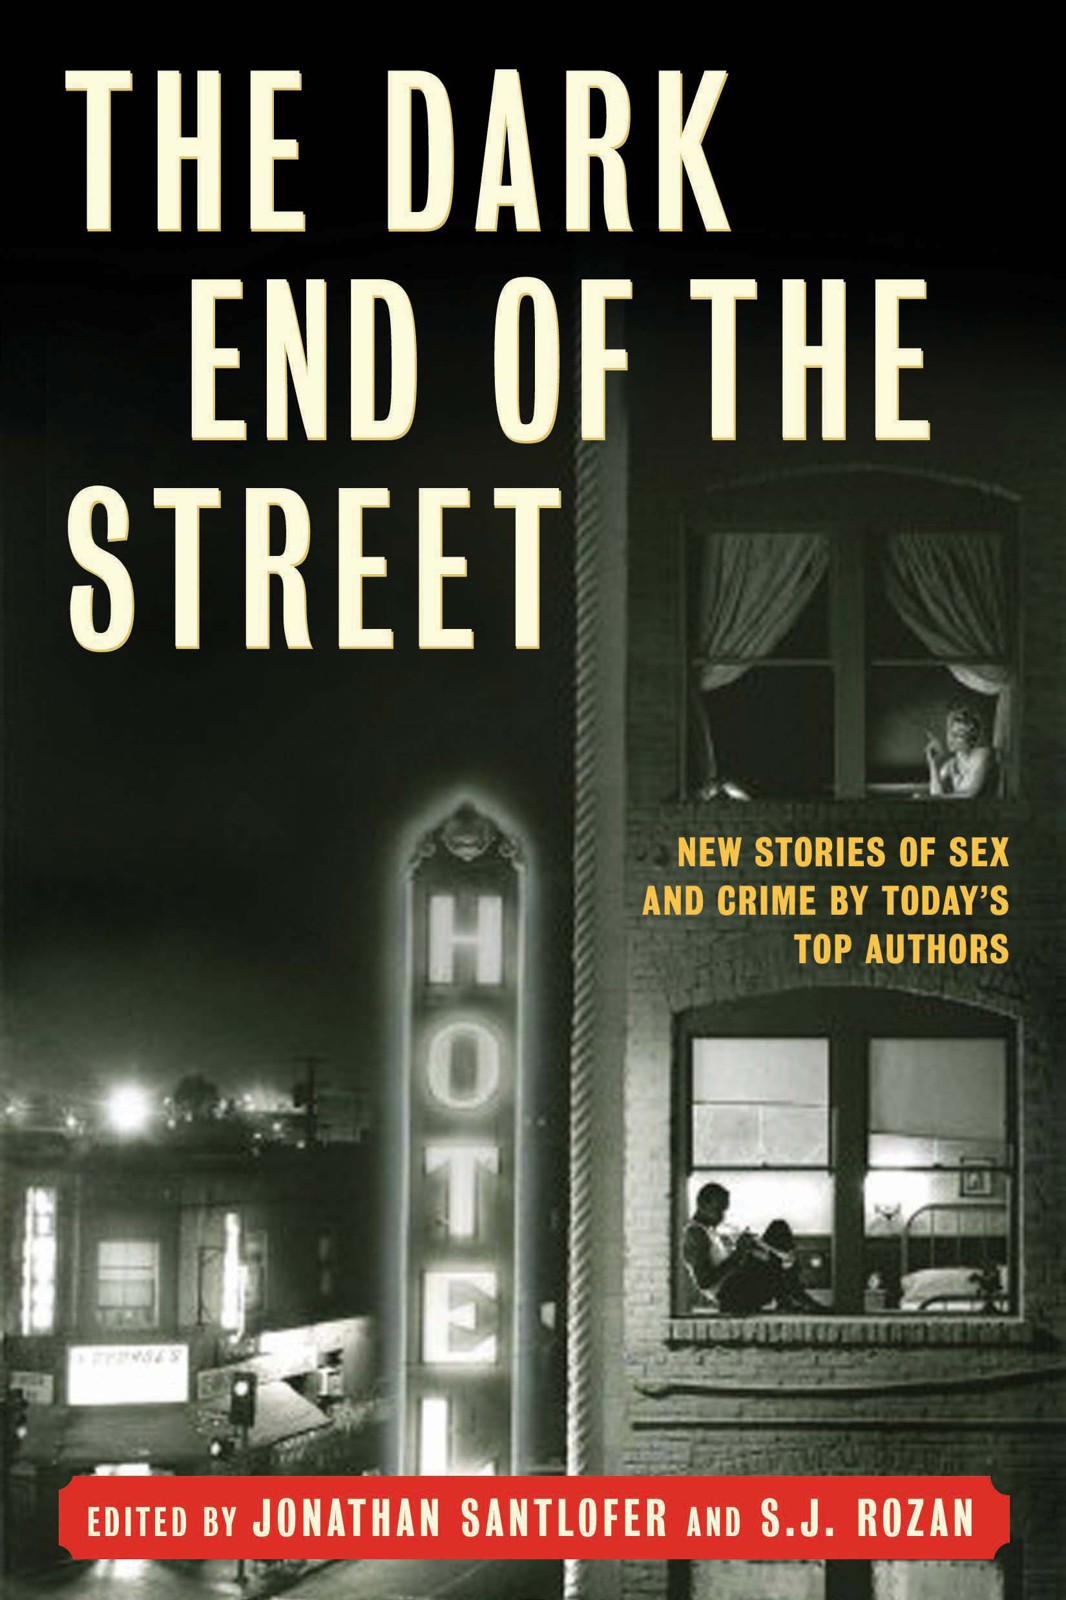 The Dark End of the Street: New Stories of Sex and Crime by Today's Top Authors